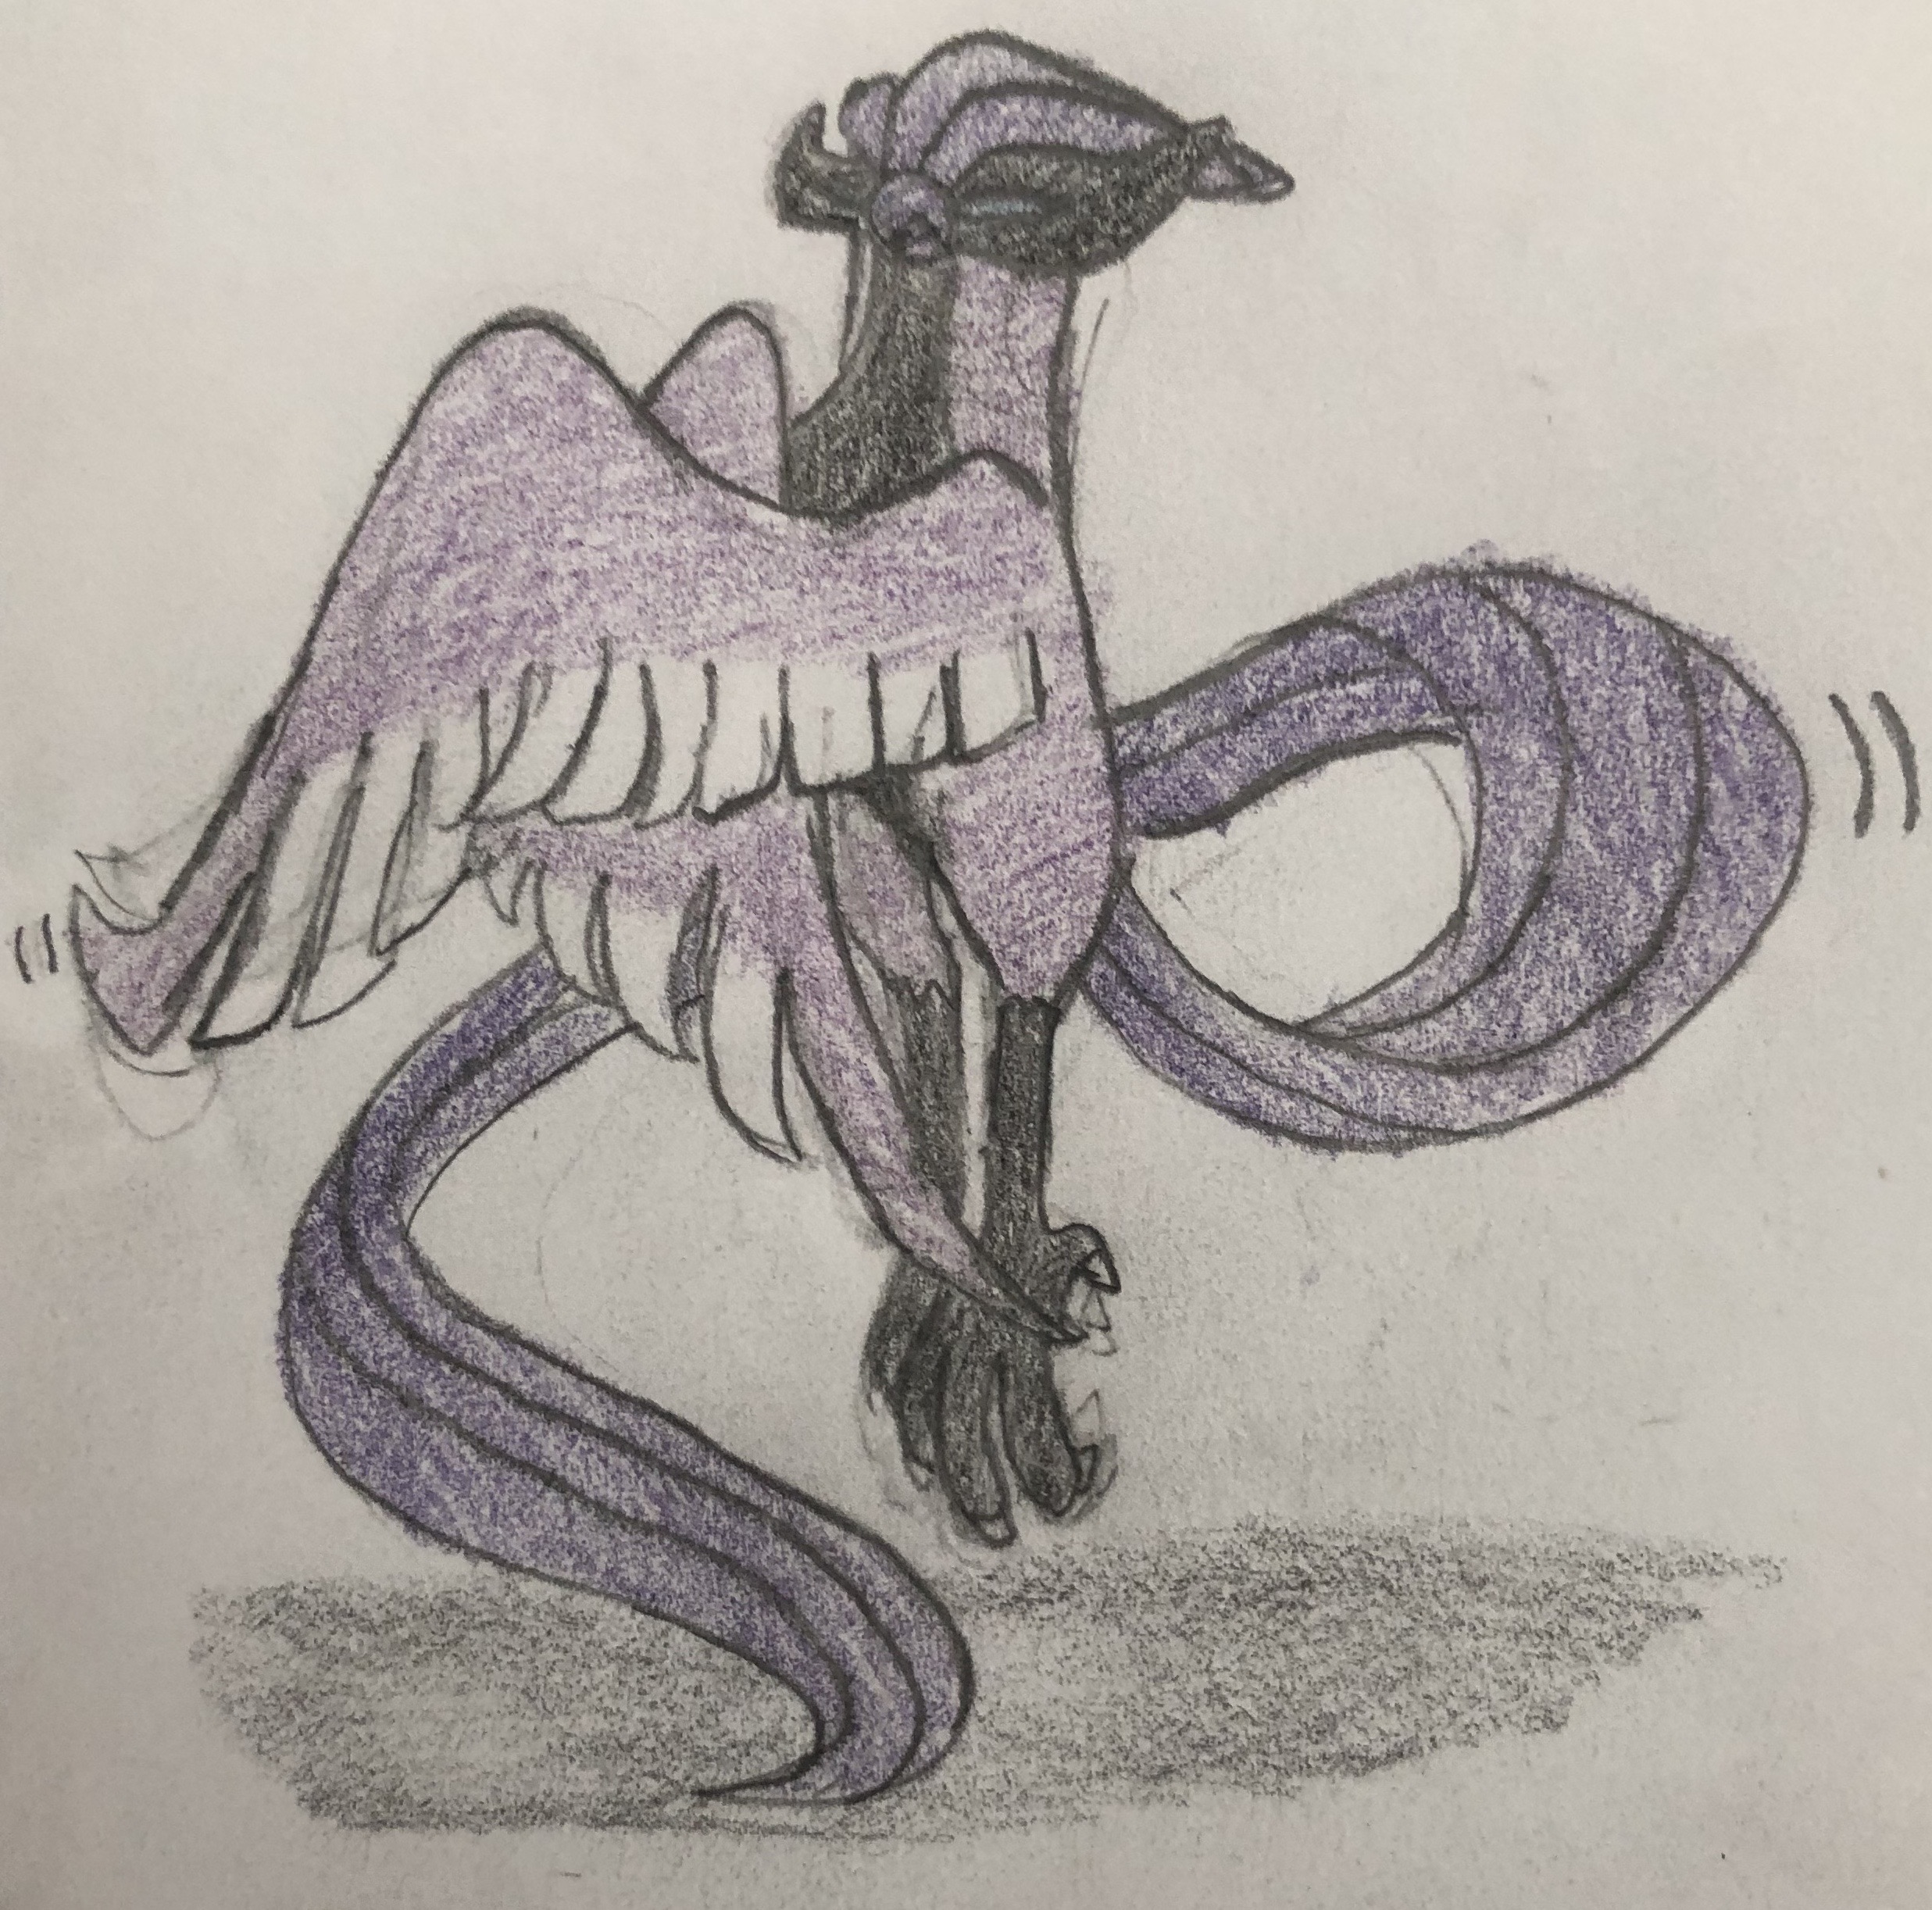 Galarian Articuno by Wings-Dragon on DeviantArt